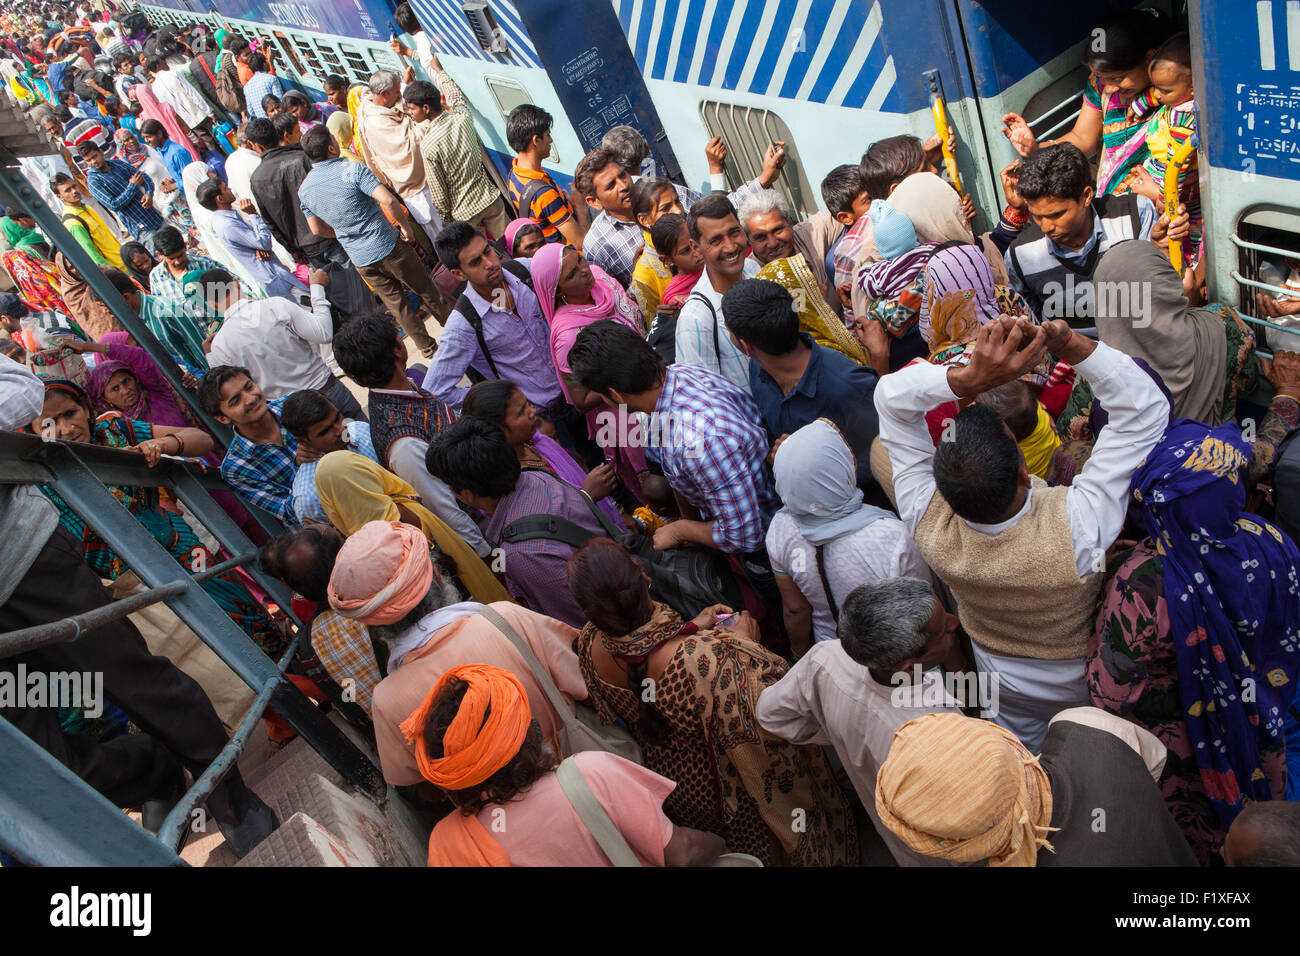 A crowd of passengers scramble to board a stationary train at the Railway Station in Rohtak Stock Photo